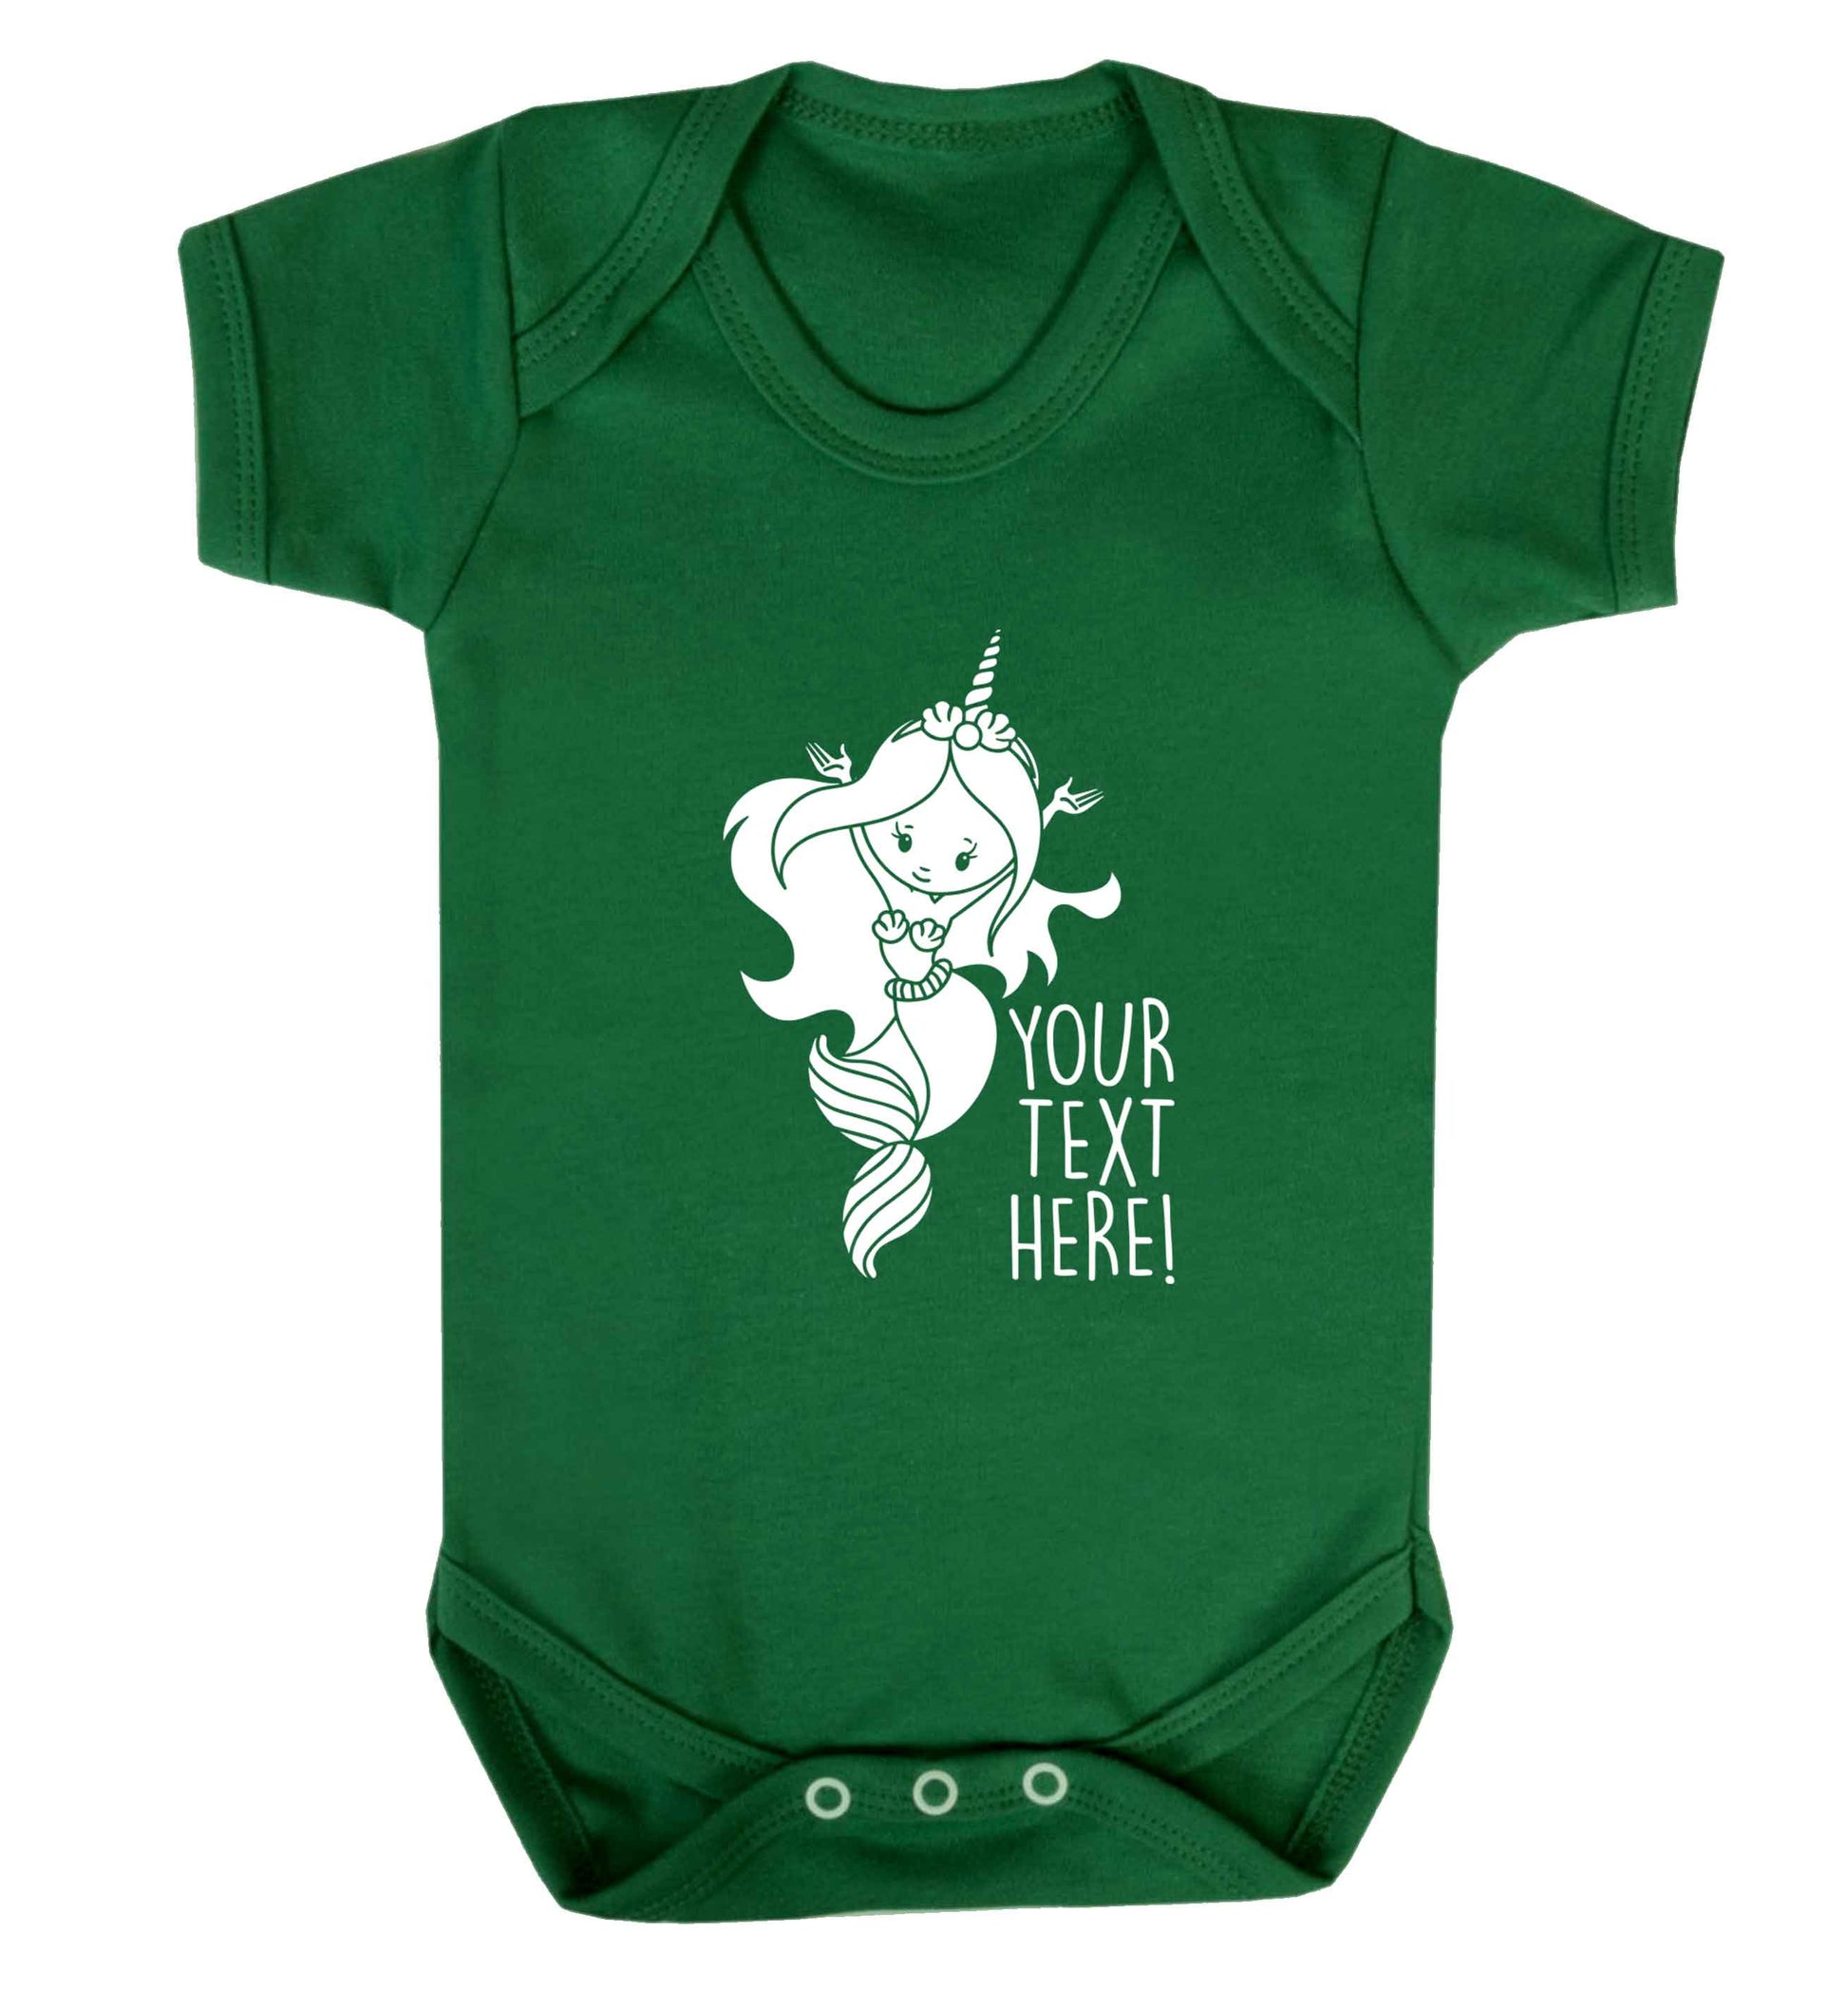 Mermaid with unicorn headband any text baby vest green 18-24 months